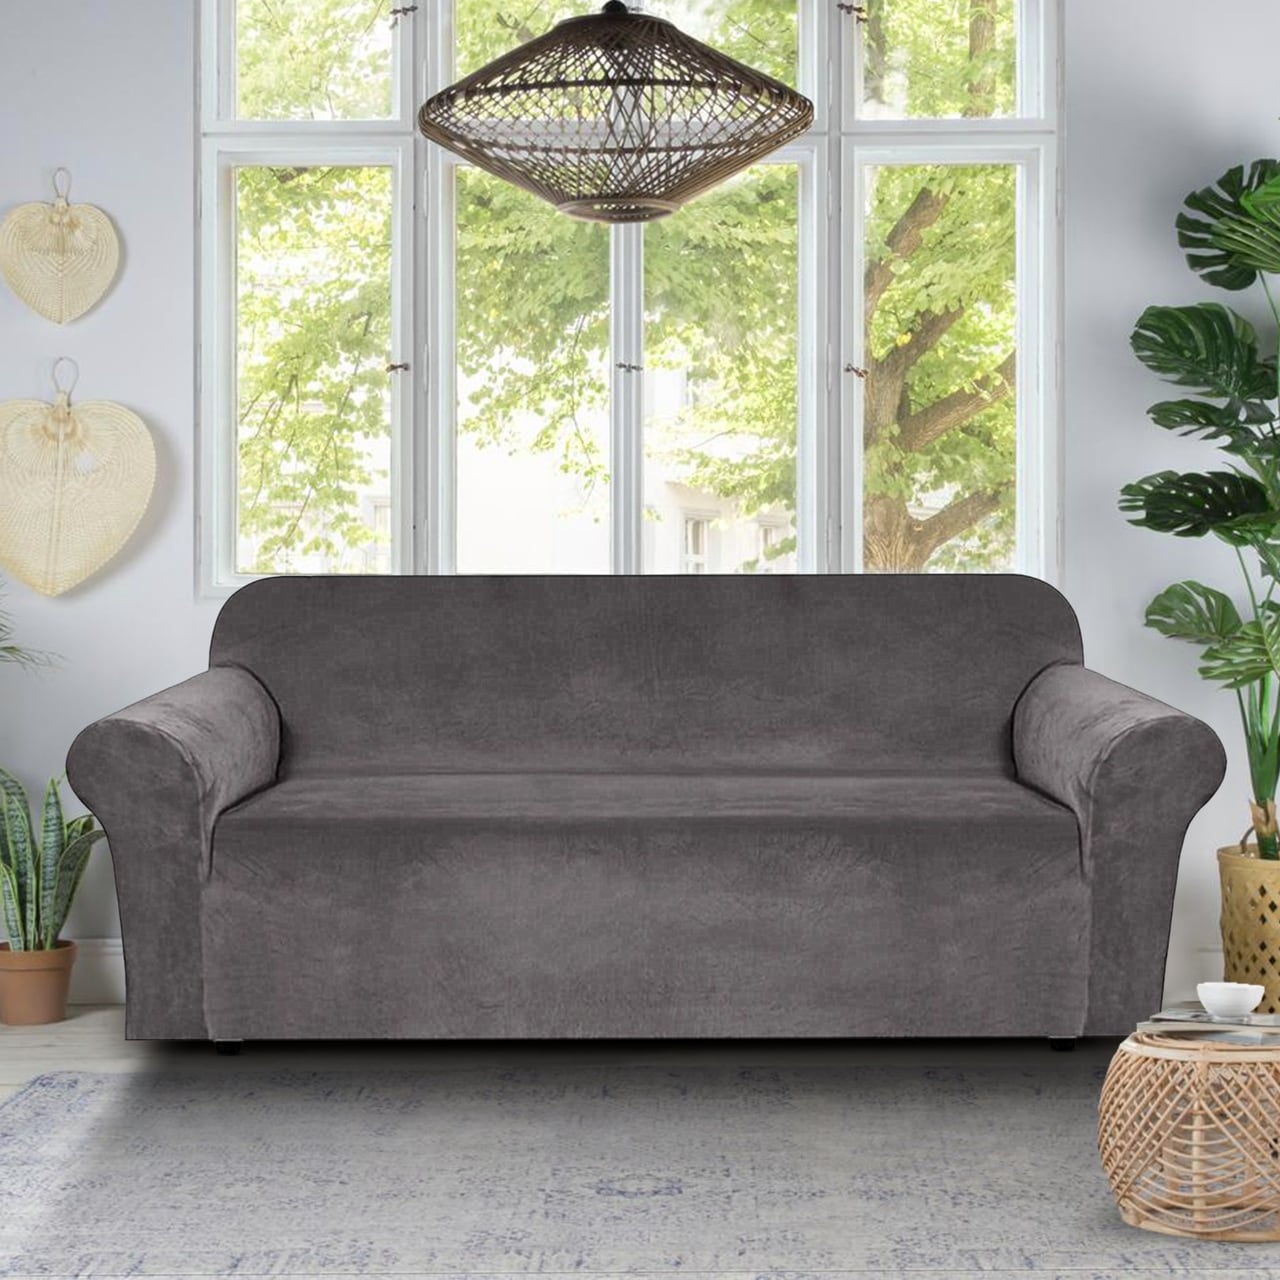 Enova Home Sofa Slipcover Couch Covers, Ultra Soft Thick Velvet Fabric Sofa Slipcover 3-Seater Couch Covers - Overstock - 35761431